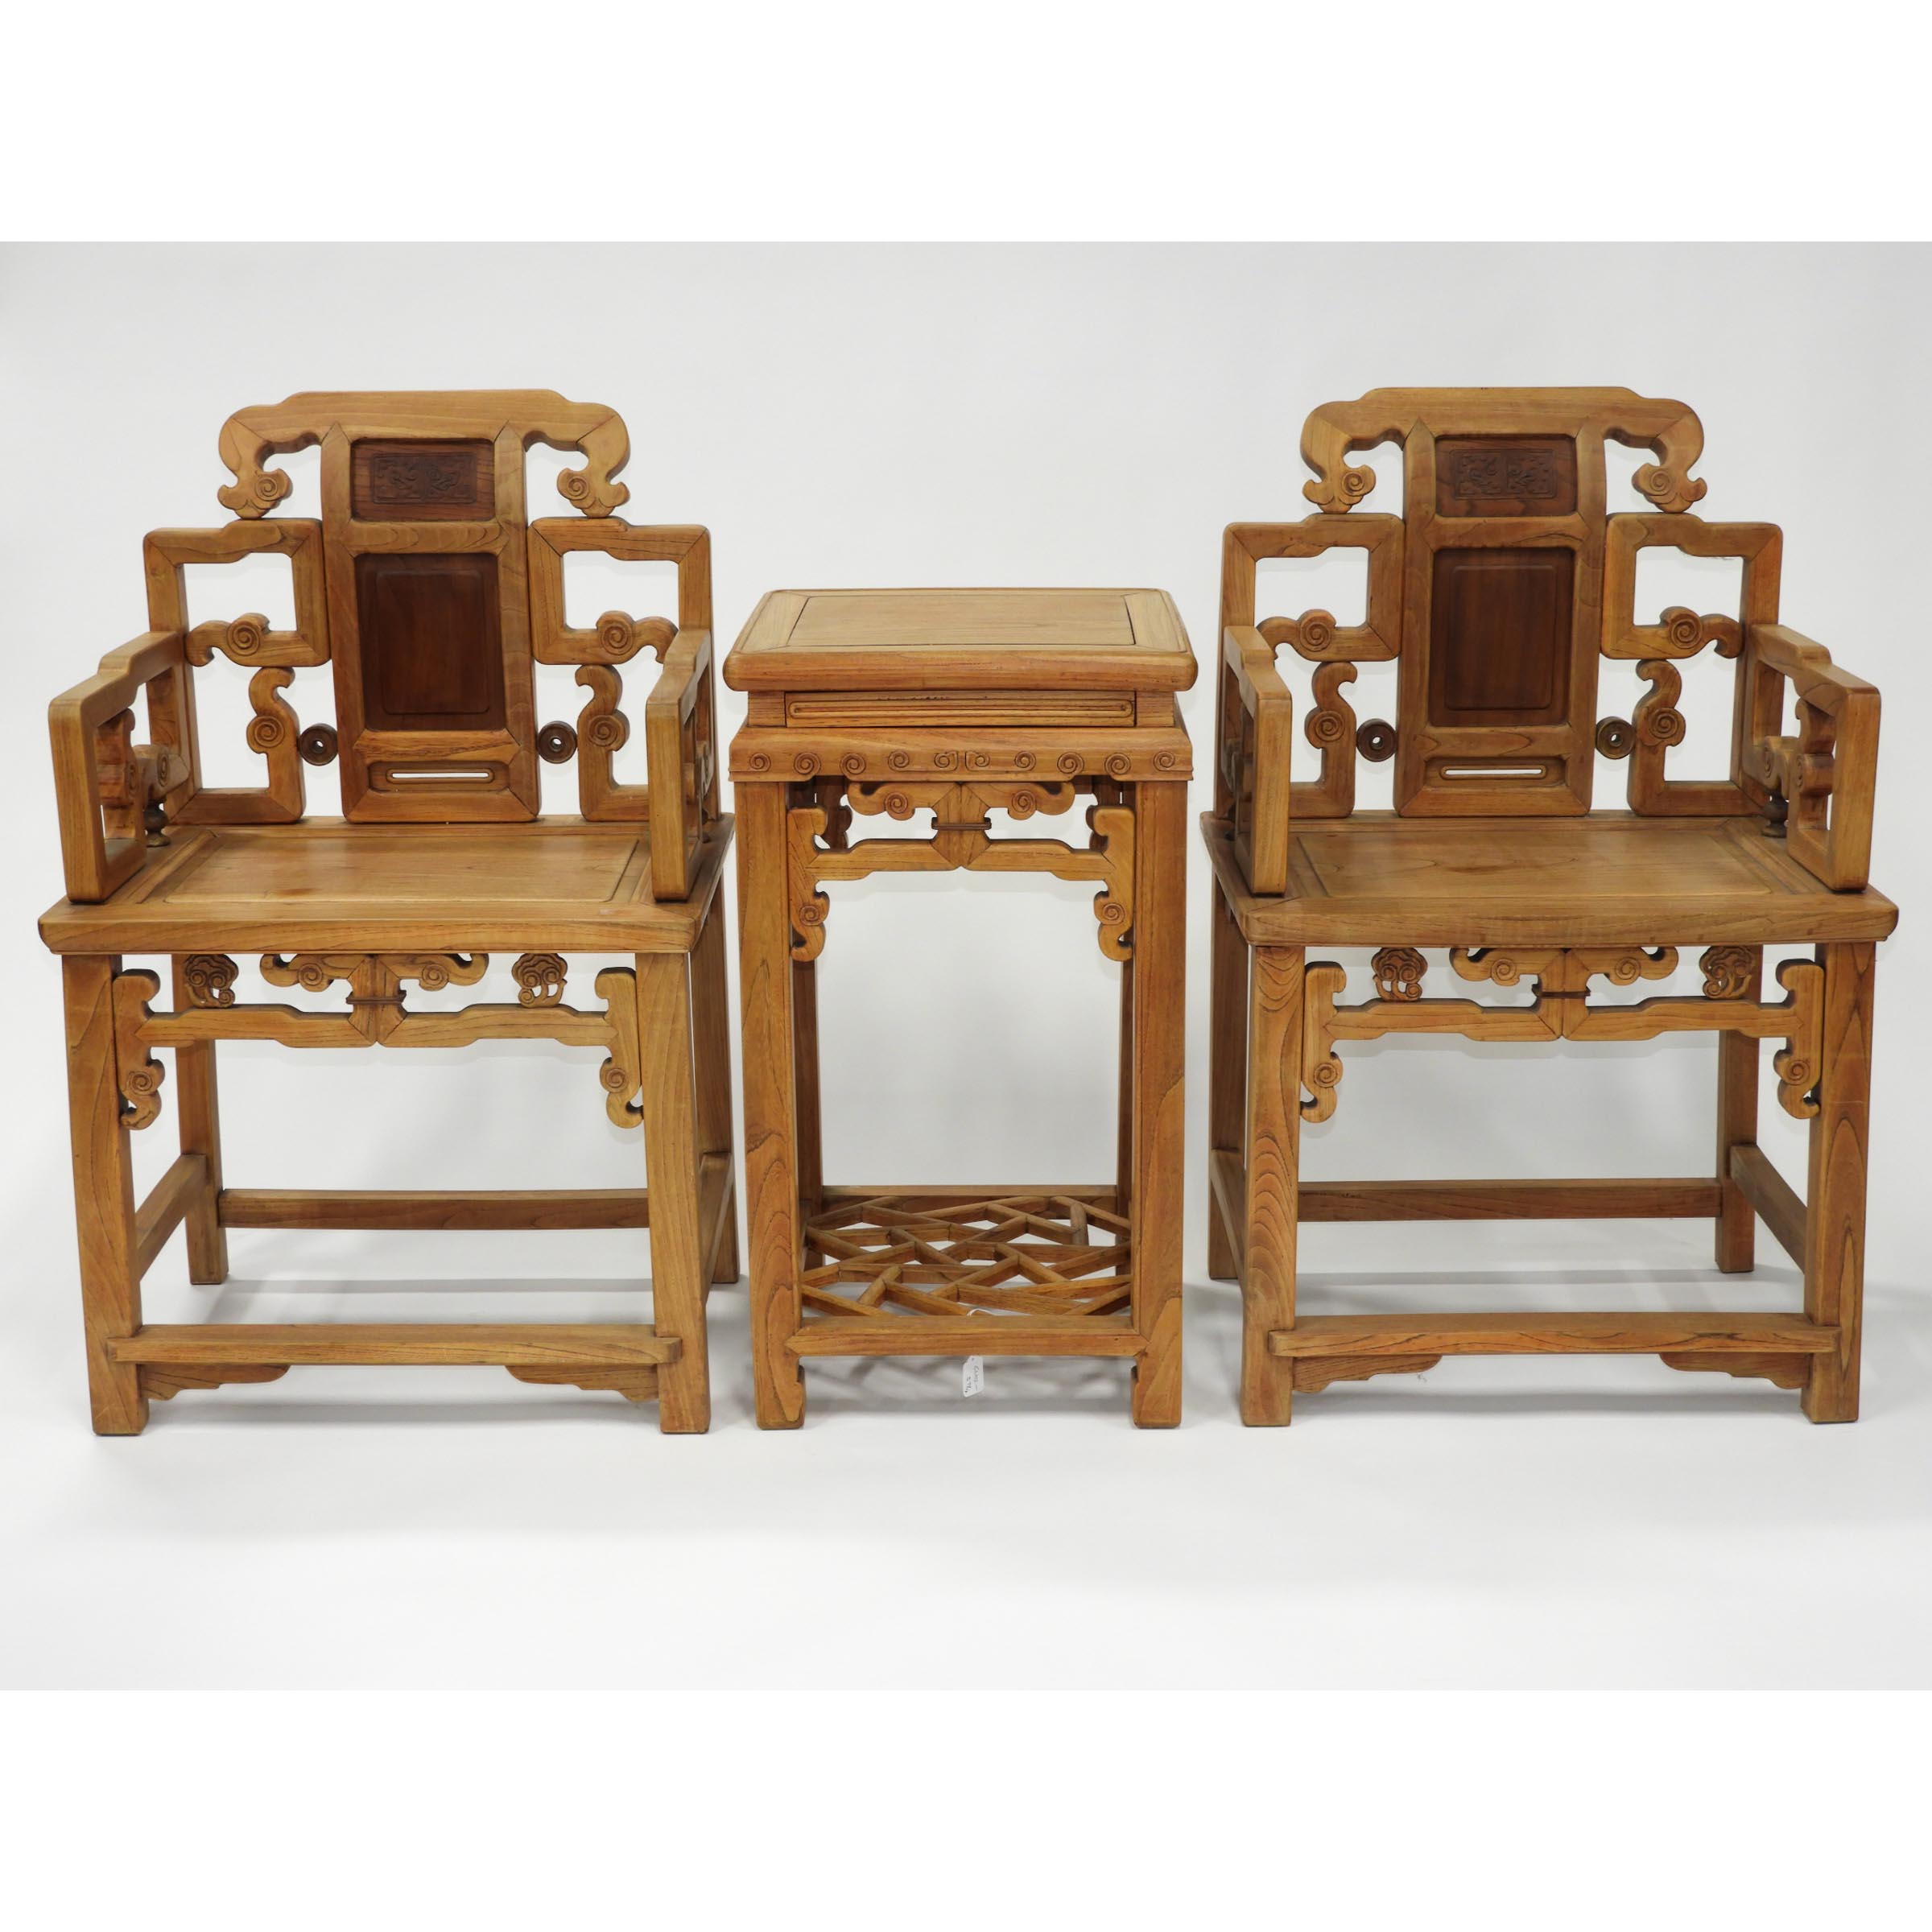 A Chinese Elmwood Table and Two Chairs